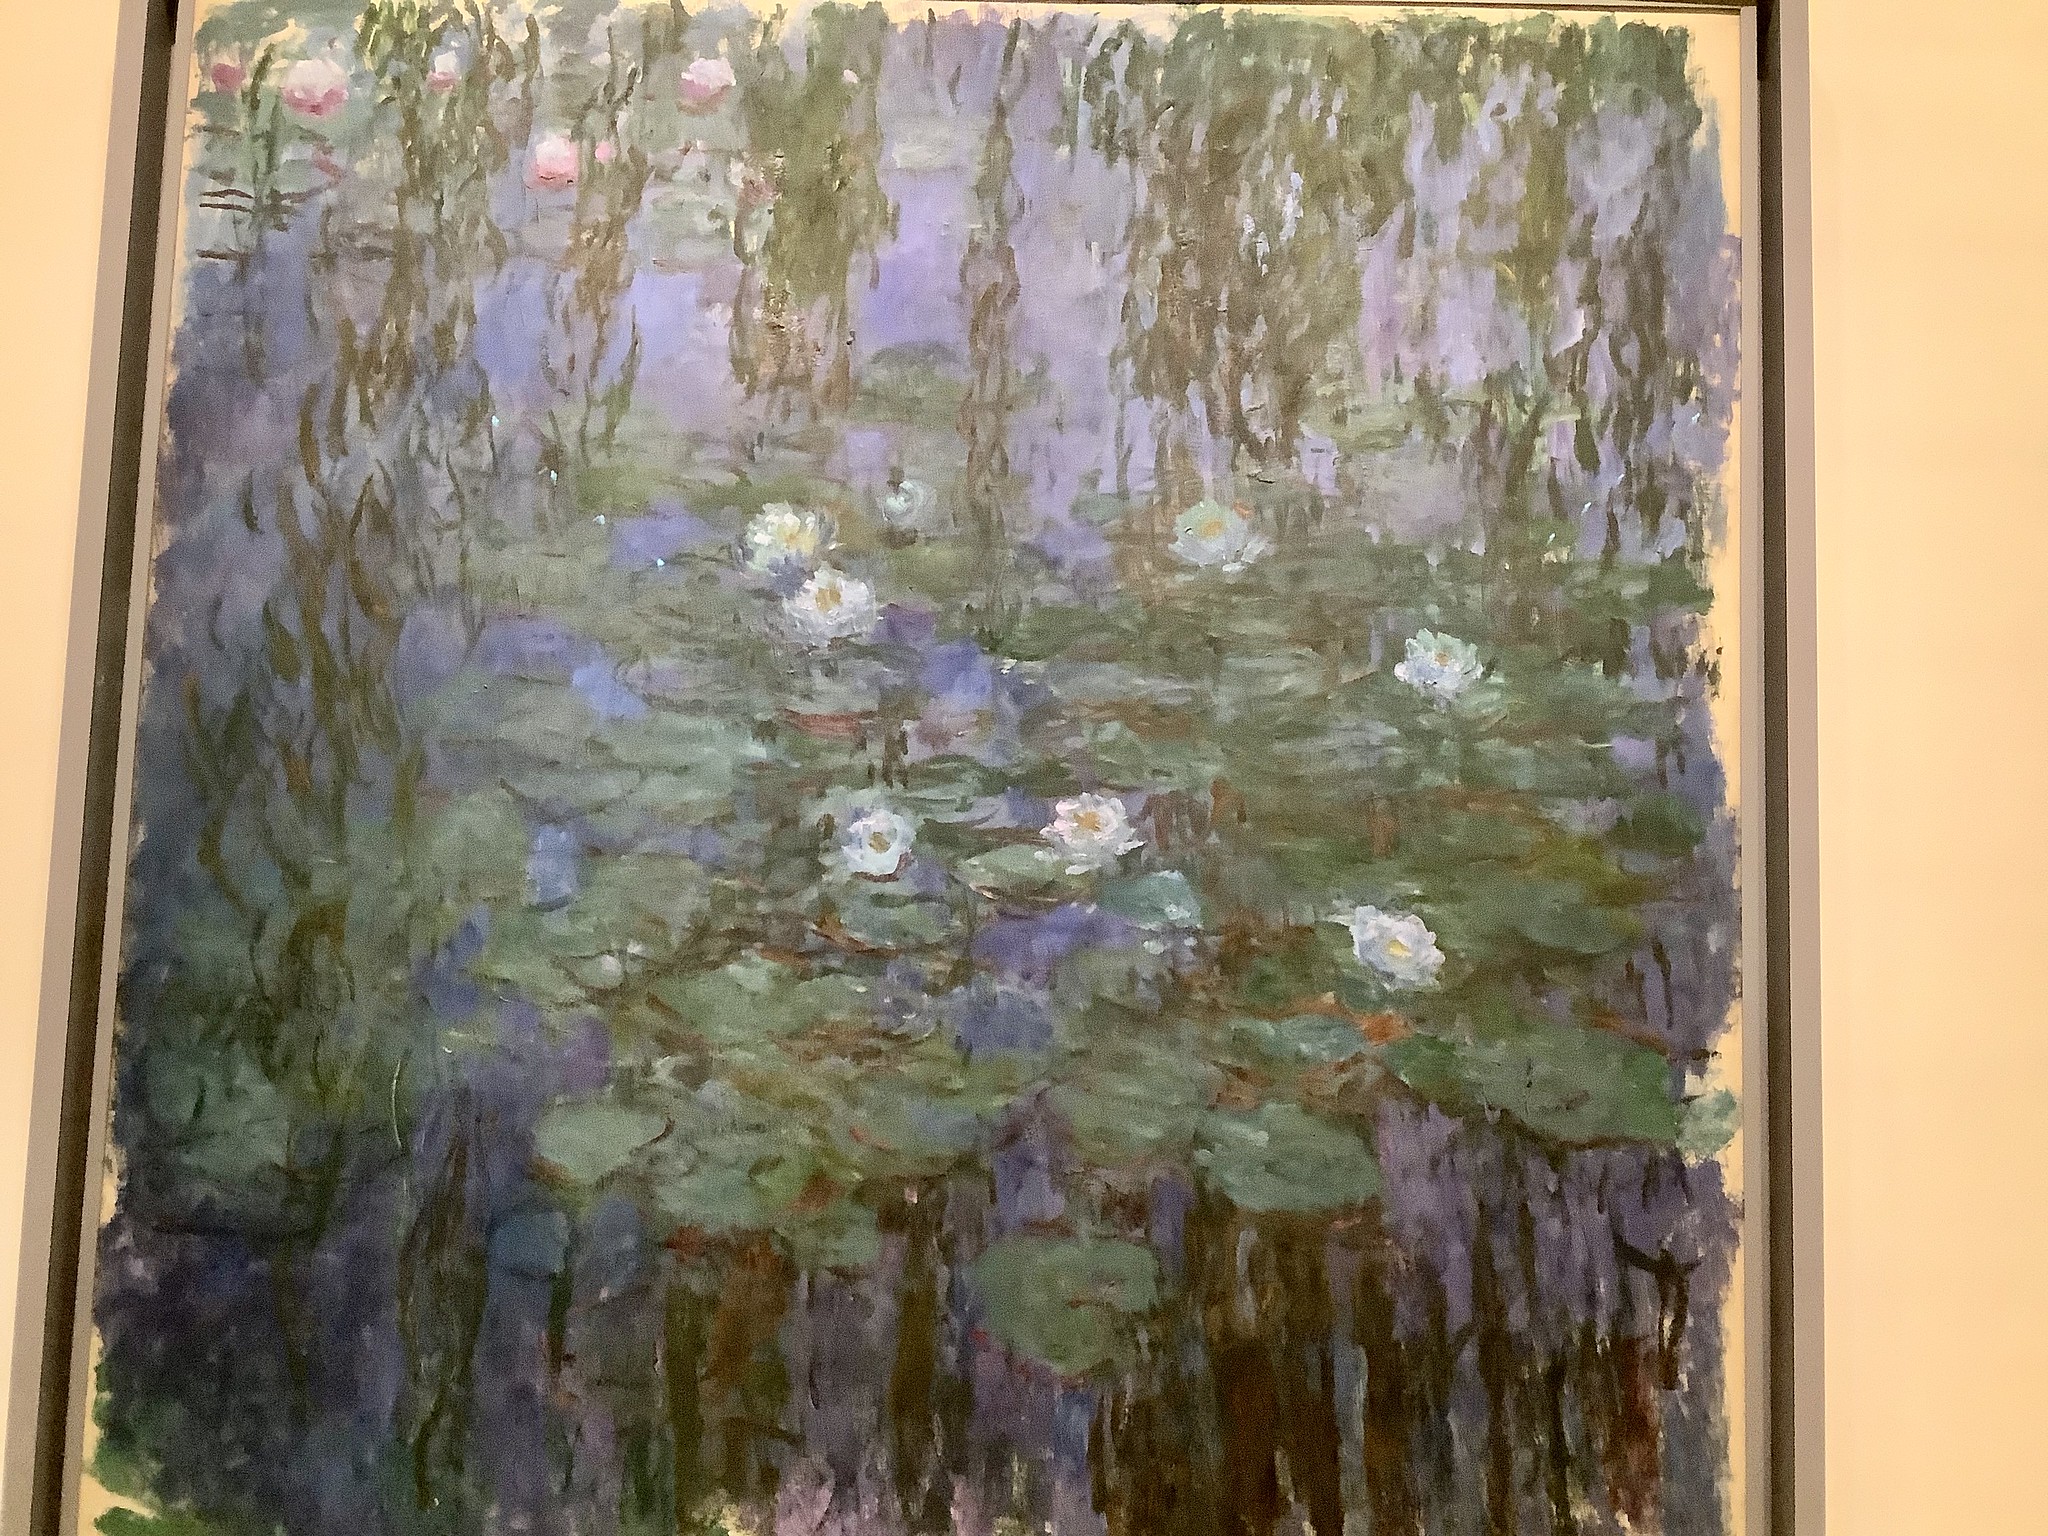 Opening of the Monet-Mitchell Exhibit at the Fondation Louis